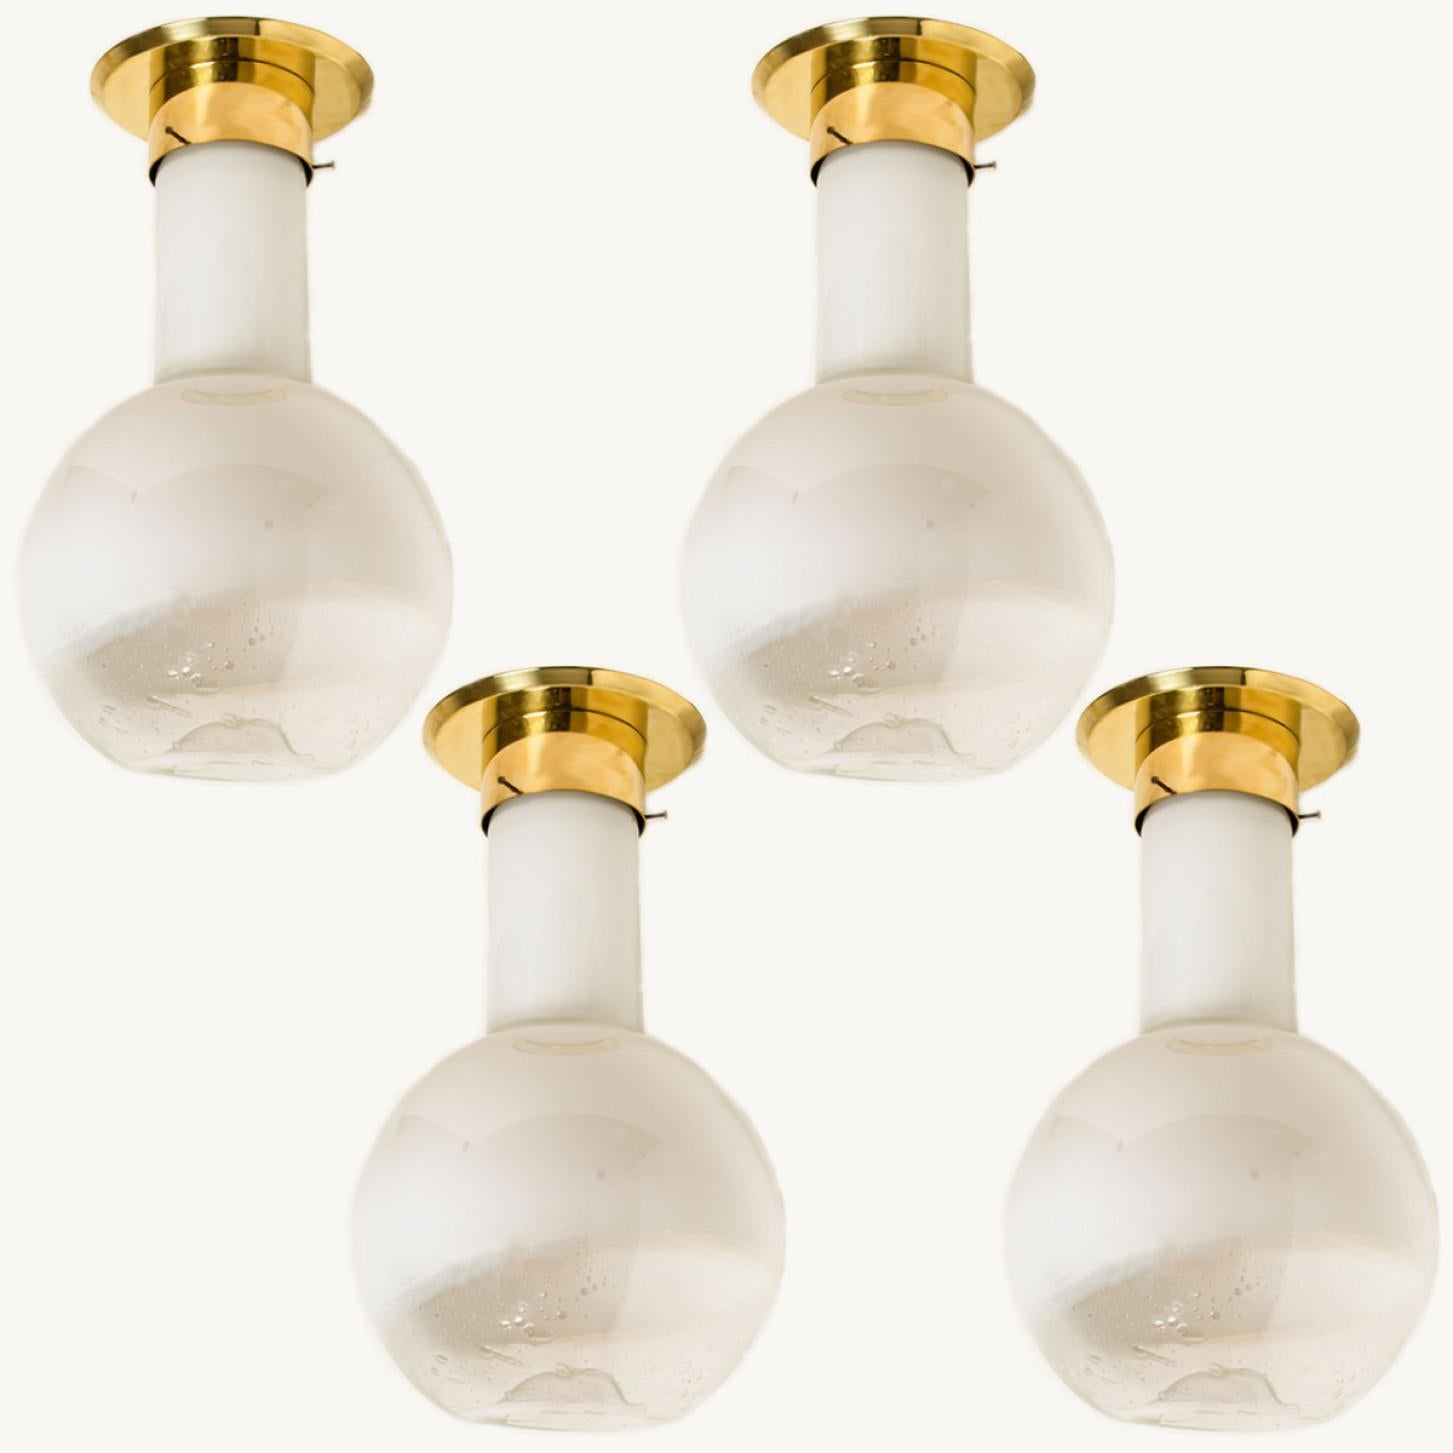 Czech Several Handblown Ceiling Lamps from Harrachov, 1970s For Sale